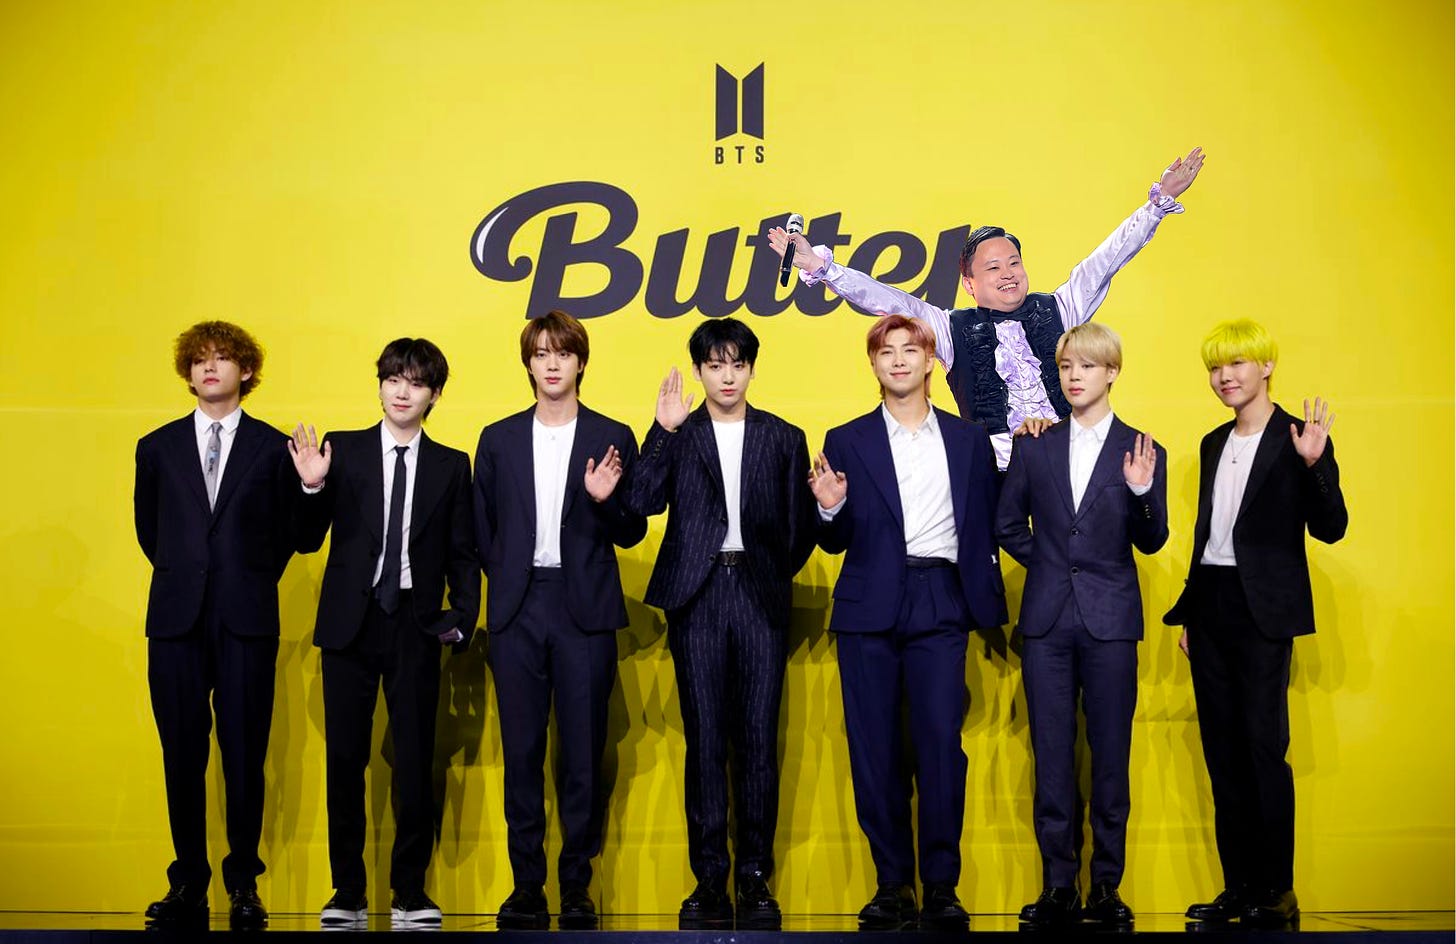 BTS standing in front of Butter backdrop with William Hung photoshopped in